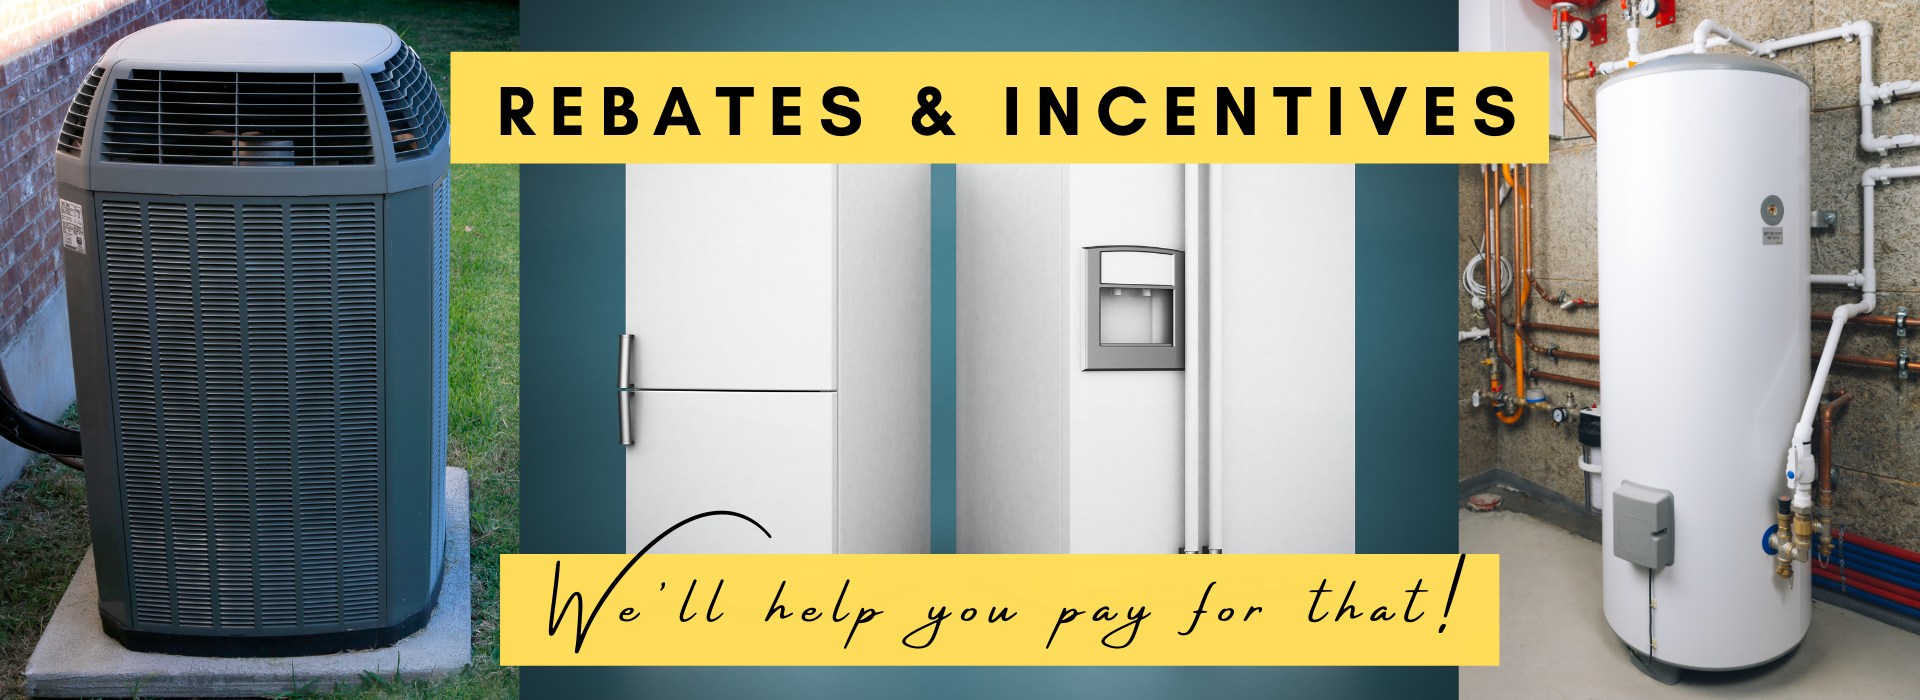 Water heater, refrigerator, and air conditioner rebates